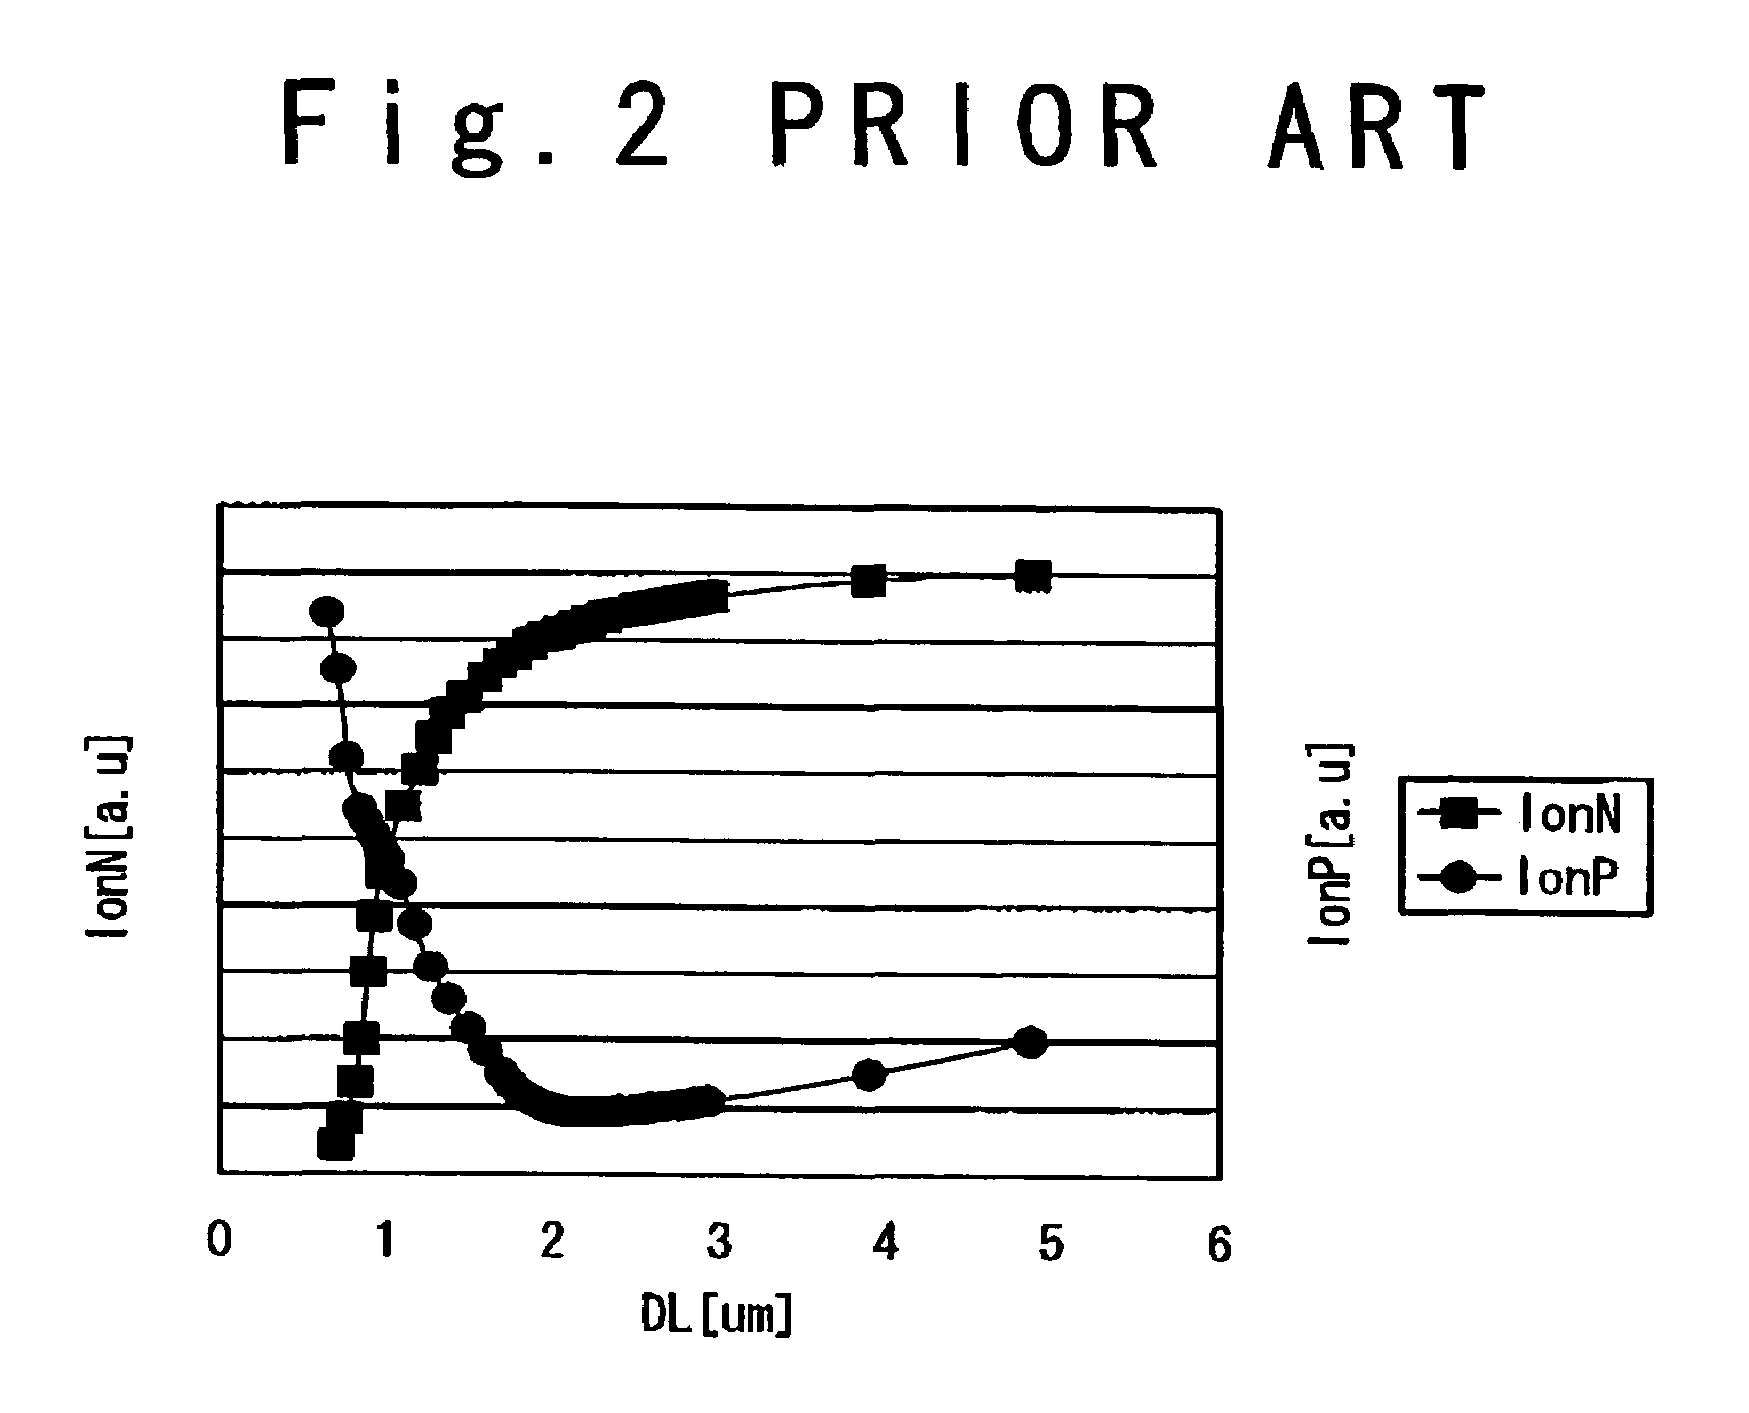 Semiconductor device with NMOS transistors arranged continuously